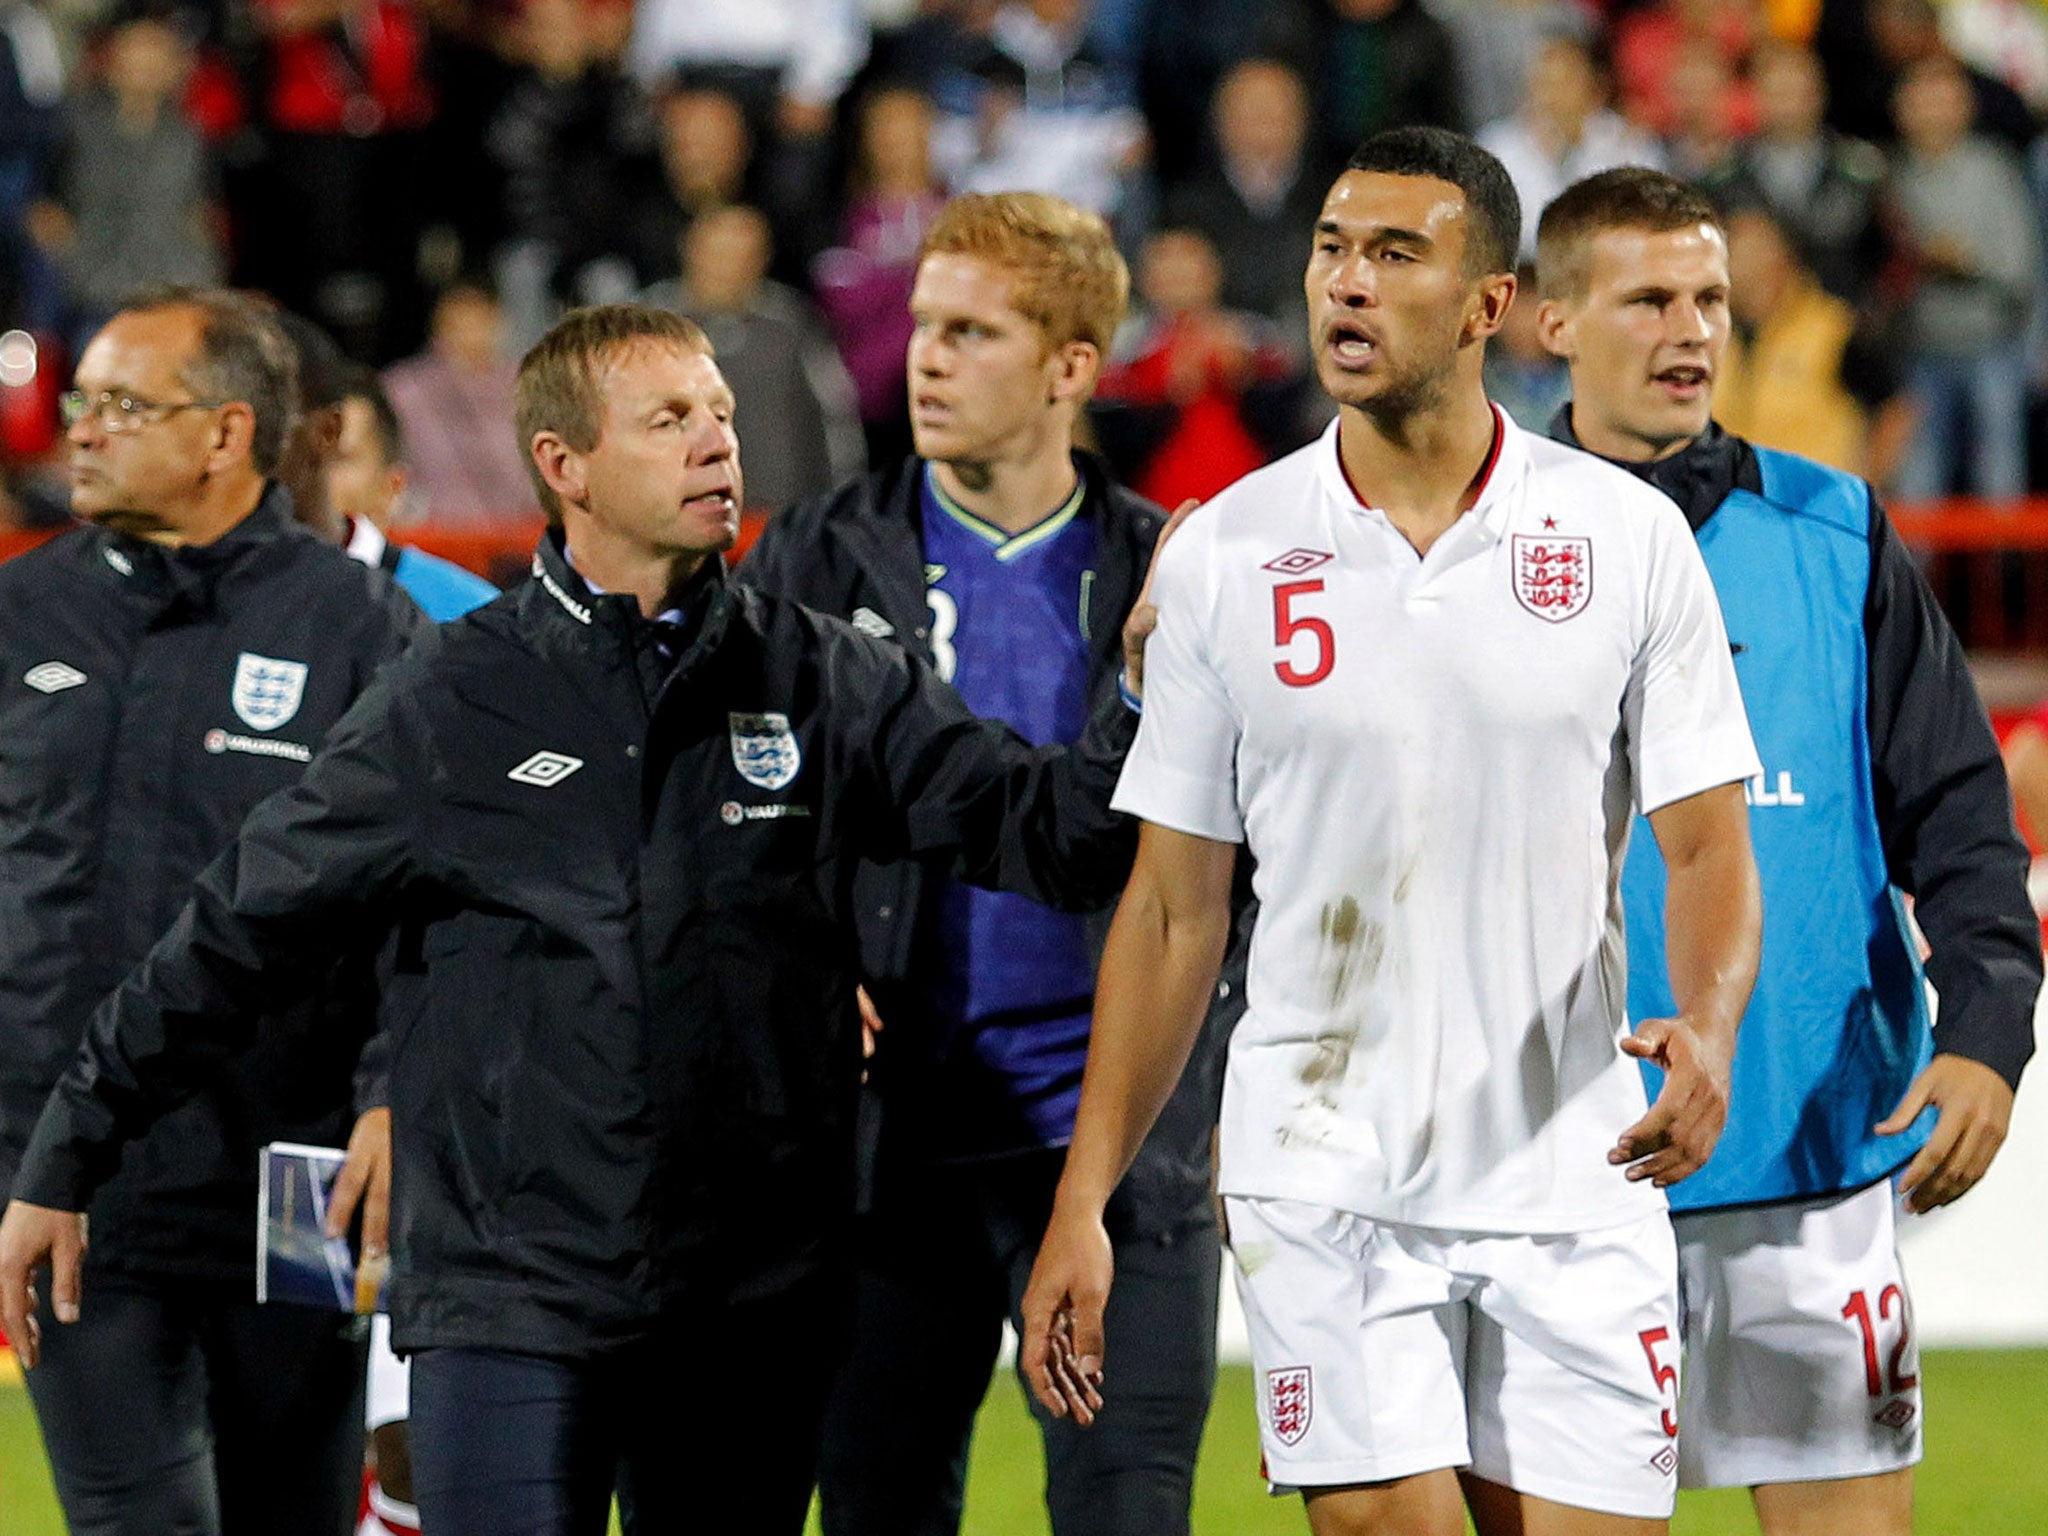 Steven Caulker (right) is led off after the game in Krusevac